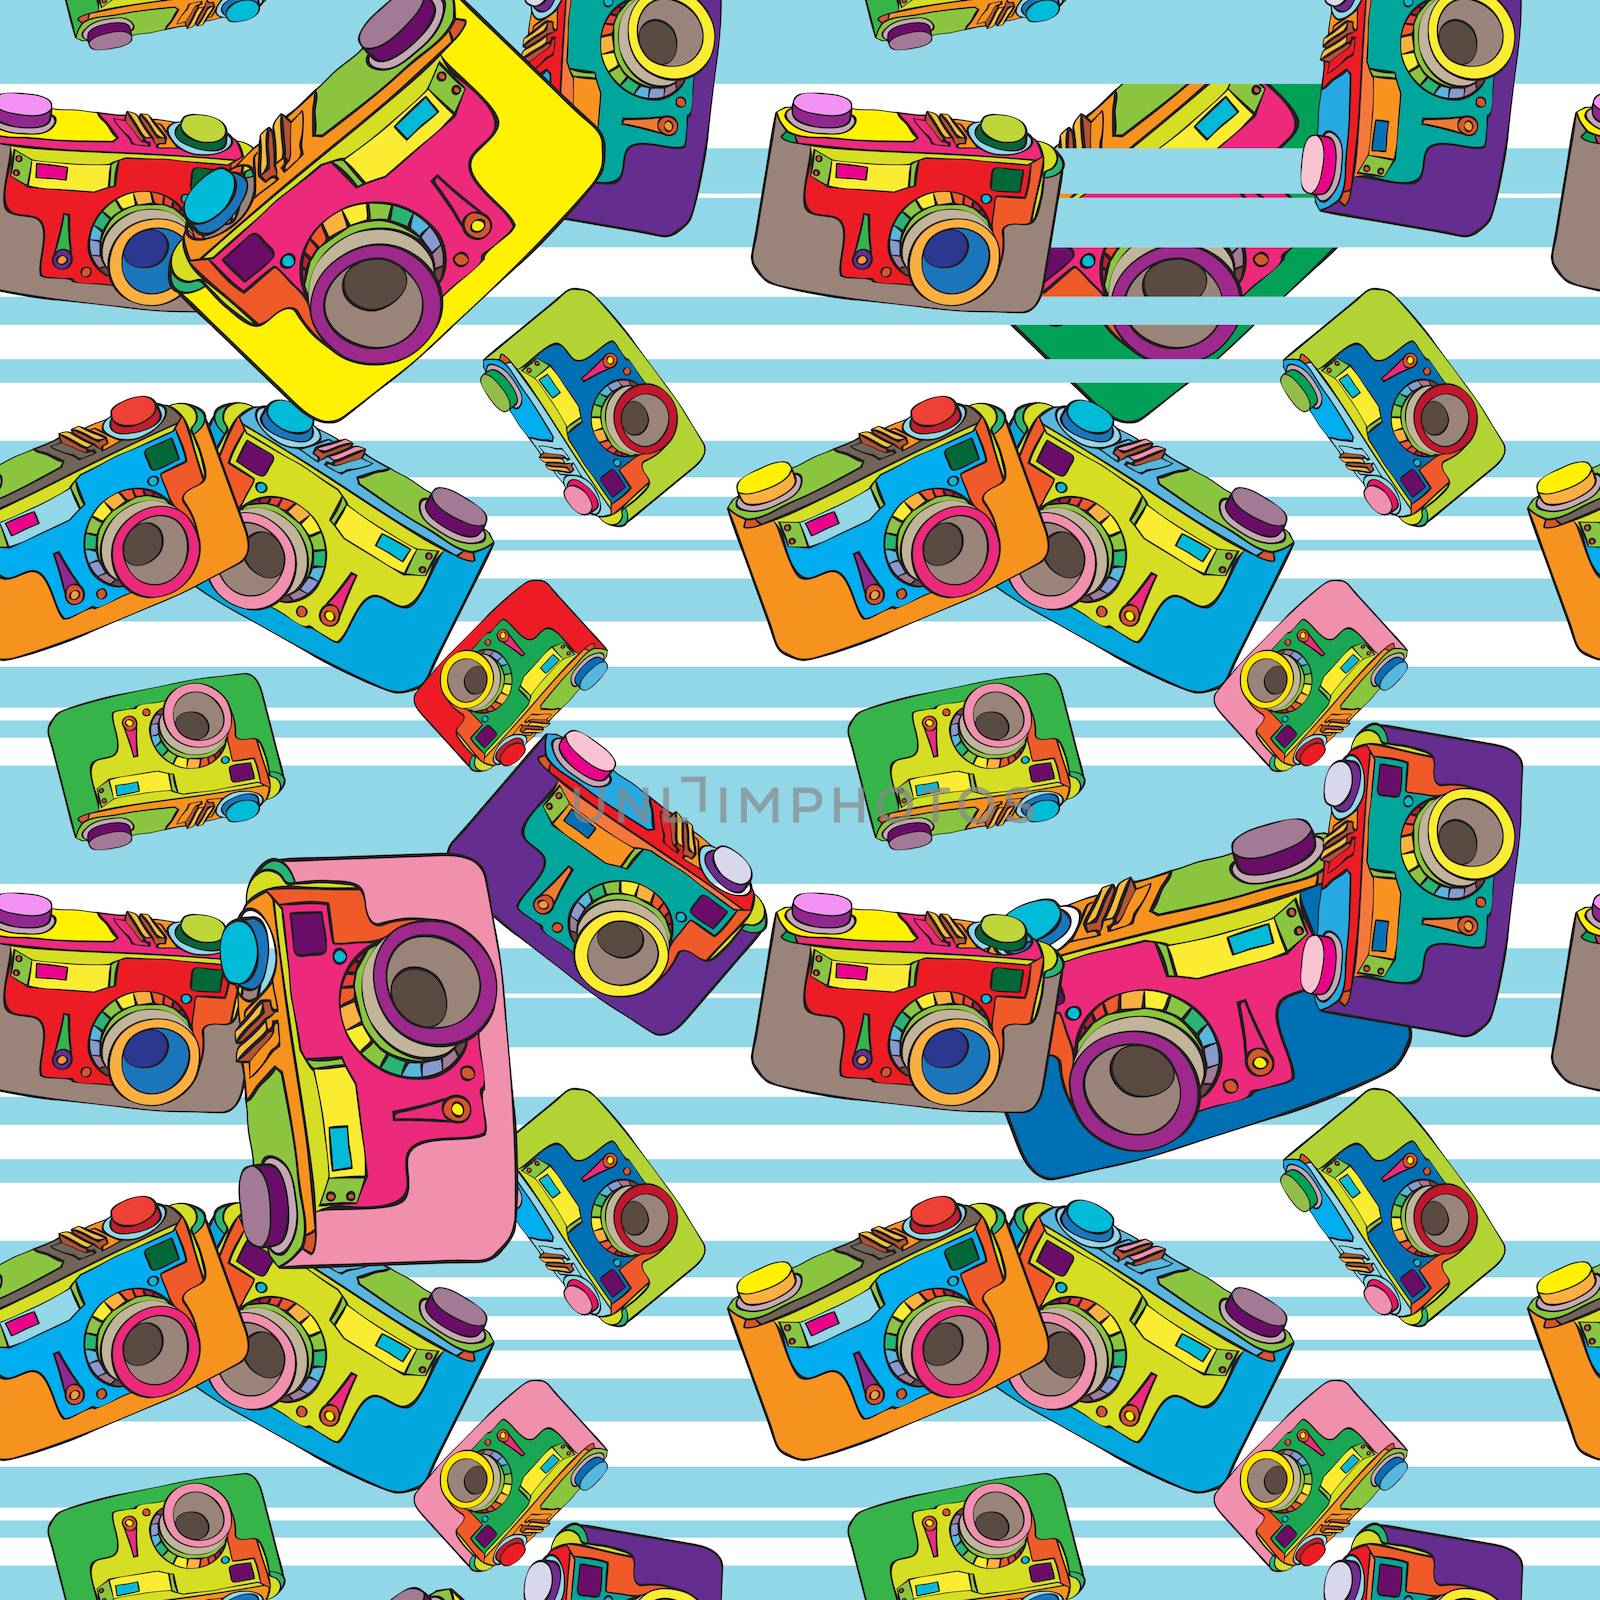 Hand drawn doodle illustration of a seamless pattern with a vintage camera in different colors over a striped background